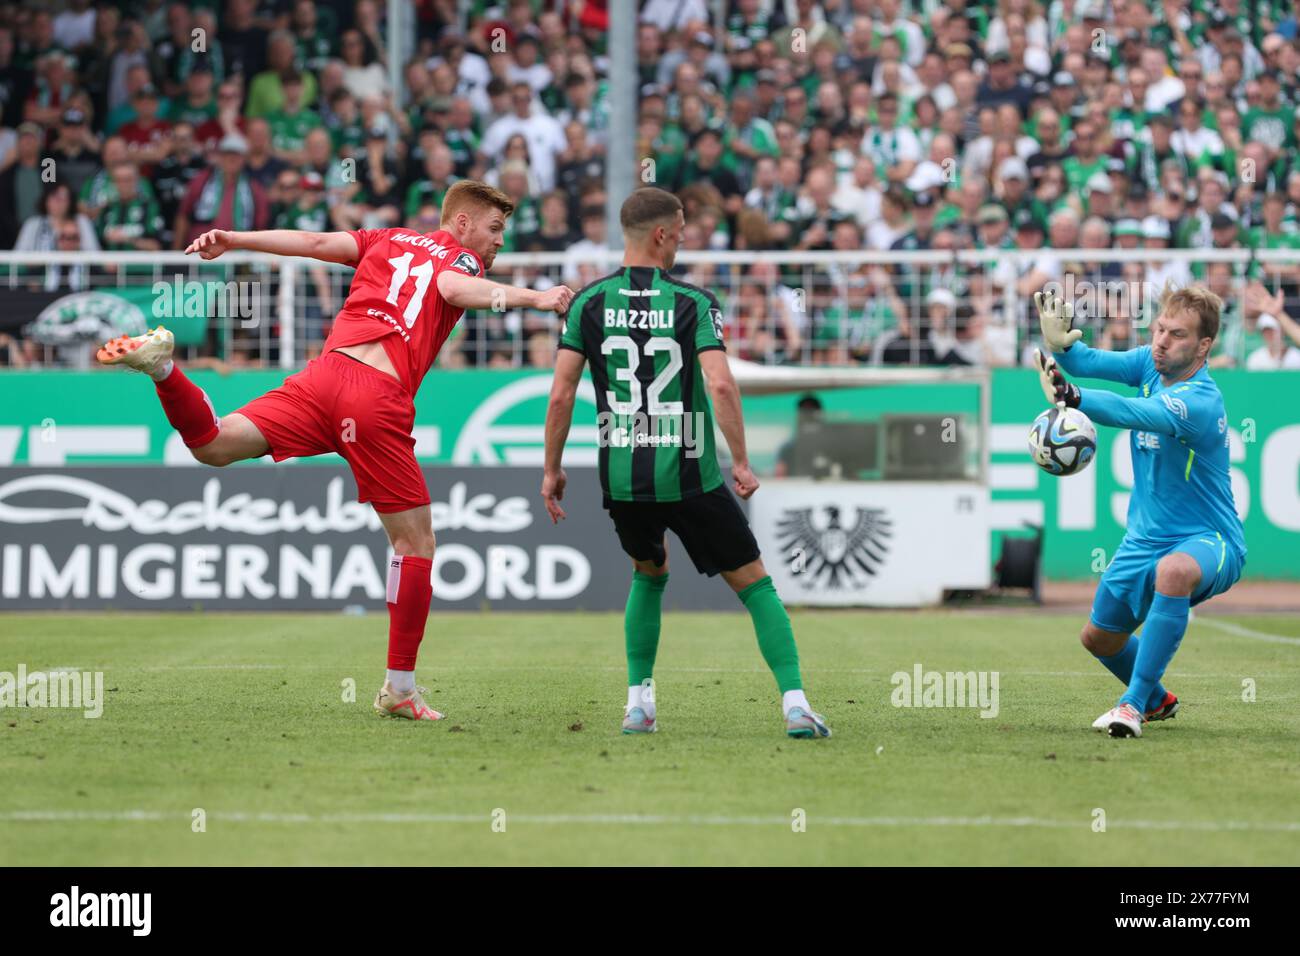 18 May 2024, North Rhine-Westphalia, Münster: Soccer: 3rd division, Preußen Münster - SpVgg Unterhaching, matchday 38, at the Preußenstadion. Münster's Luca Bazzoli (center) and goalkeeper Maximilian Schulze-Niehues (right) watch as Unterhaching's Mathias Fetsch (left) heads the ball into the goal. The goal is later disallowed. Photo: Friso Gentsch/dpa Stock Photo